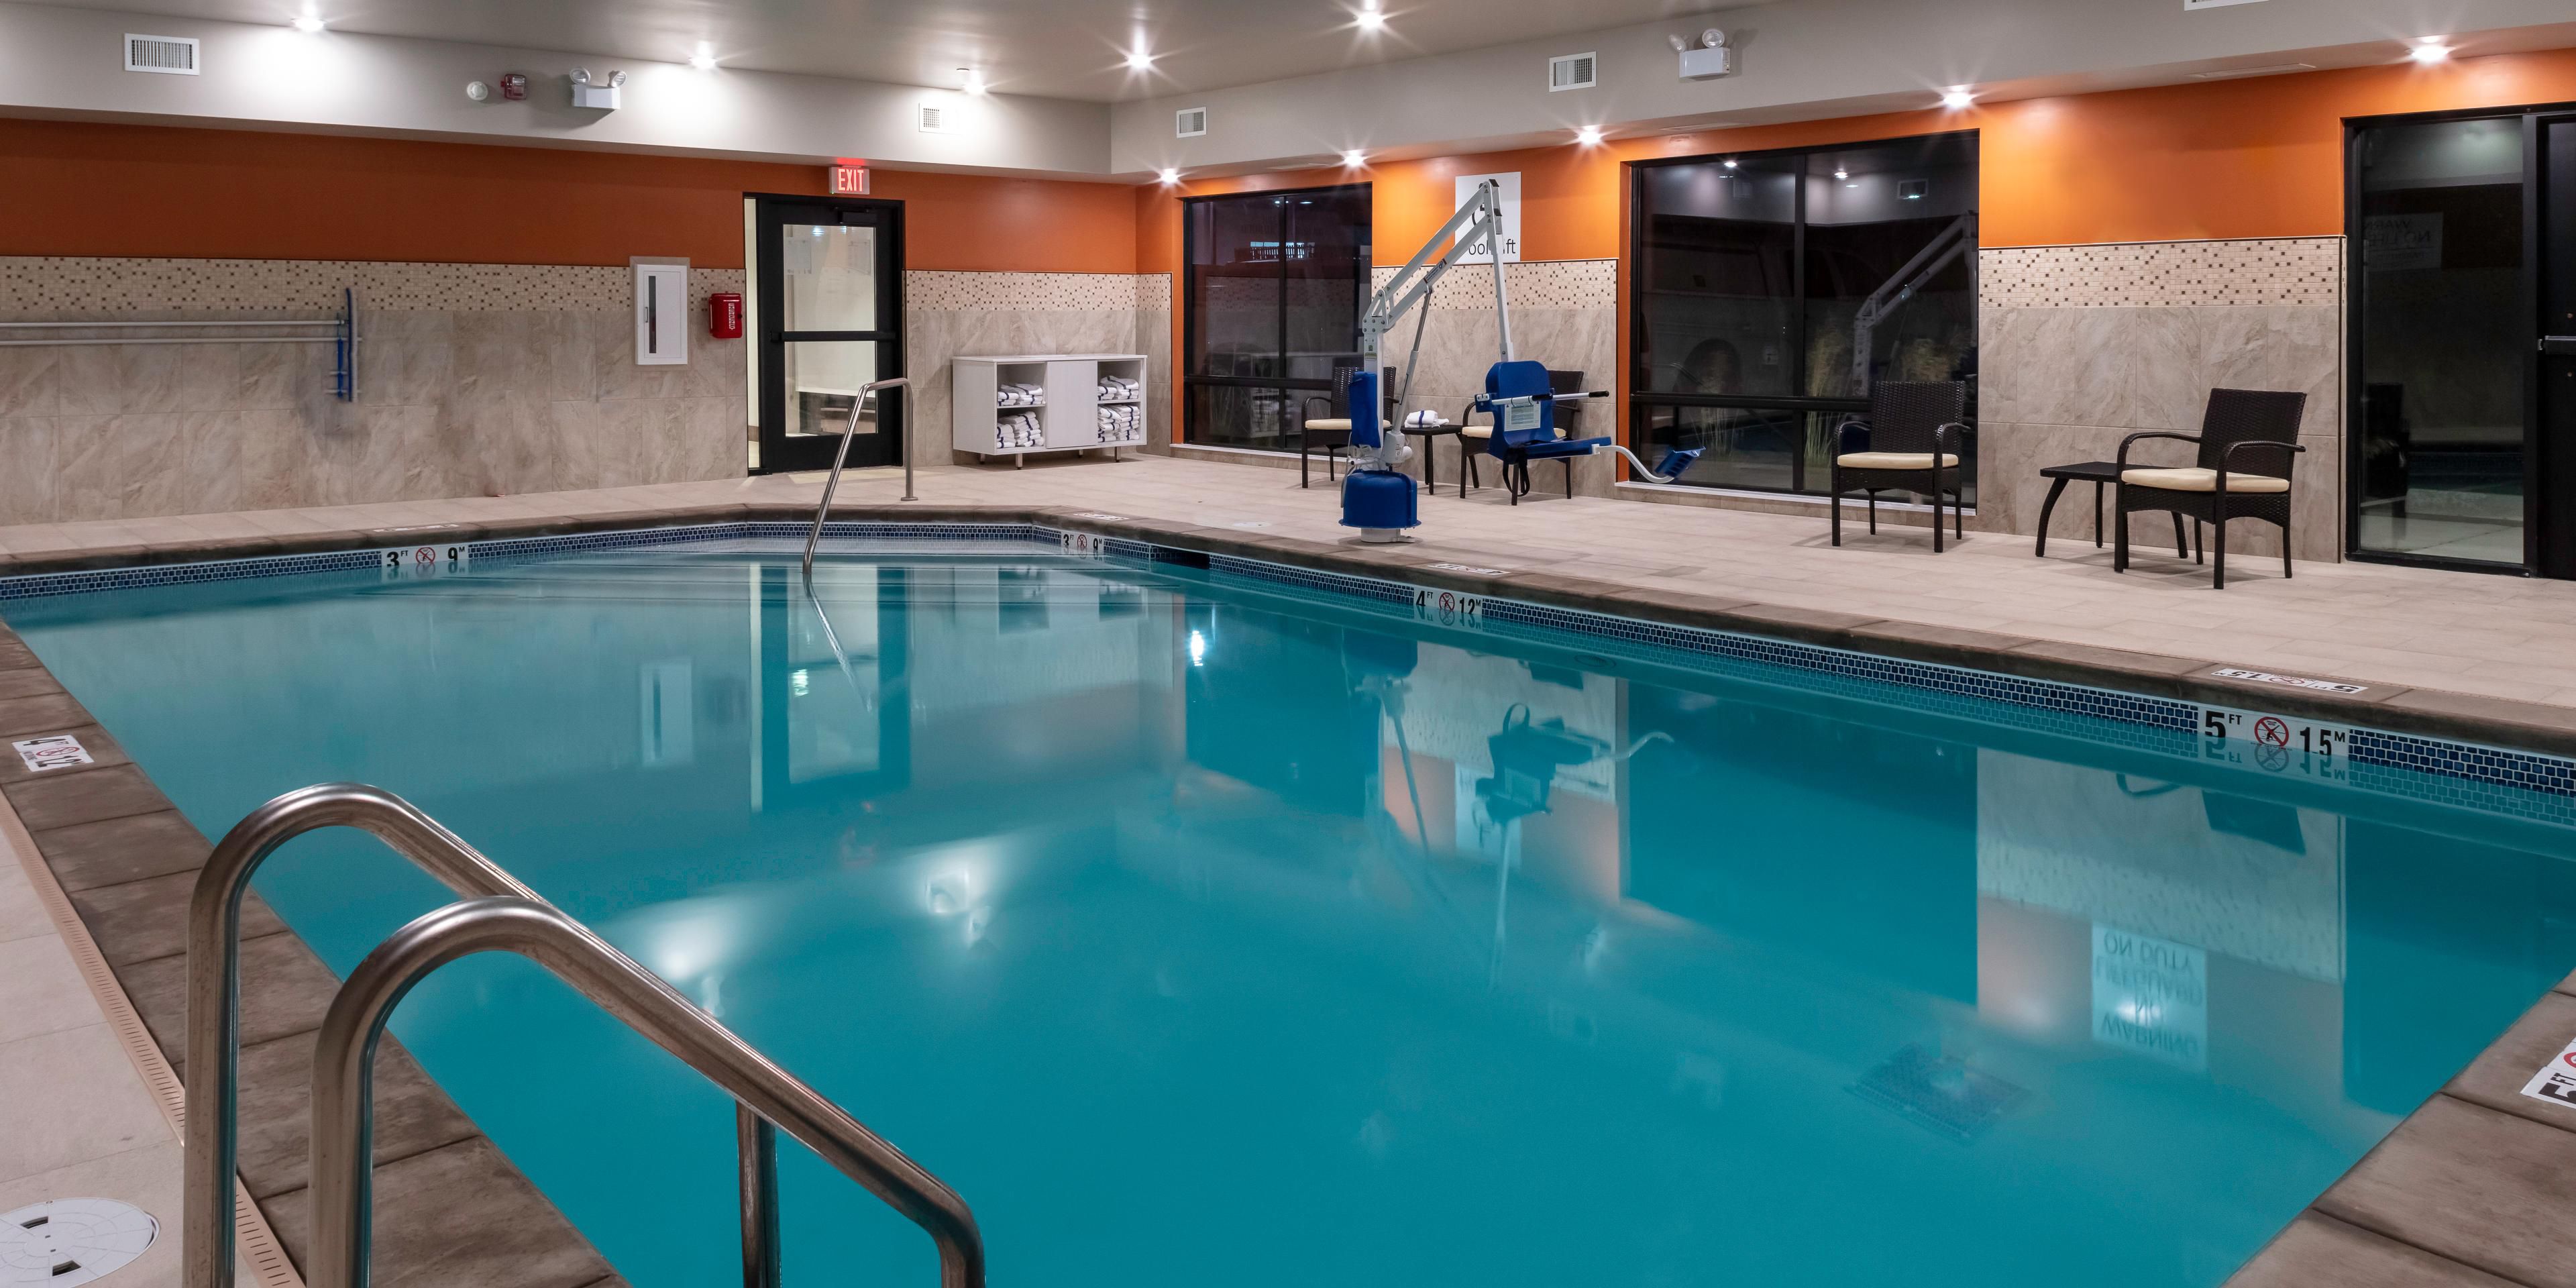 Our indoor heated pool and fitness center open, a great way to burn off some energy before heading to a great nights rest!